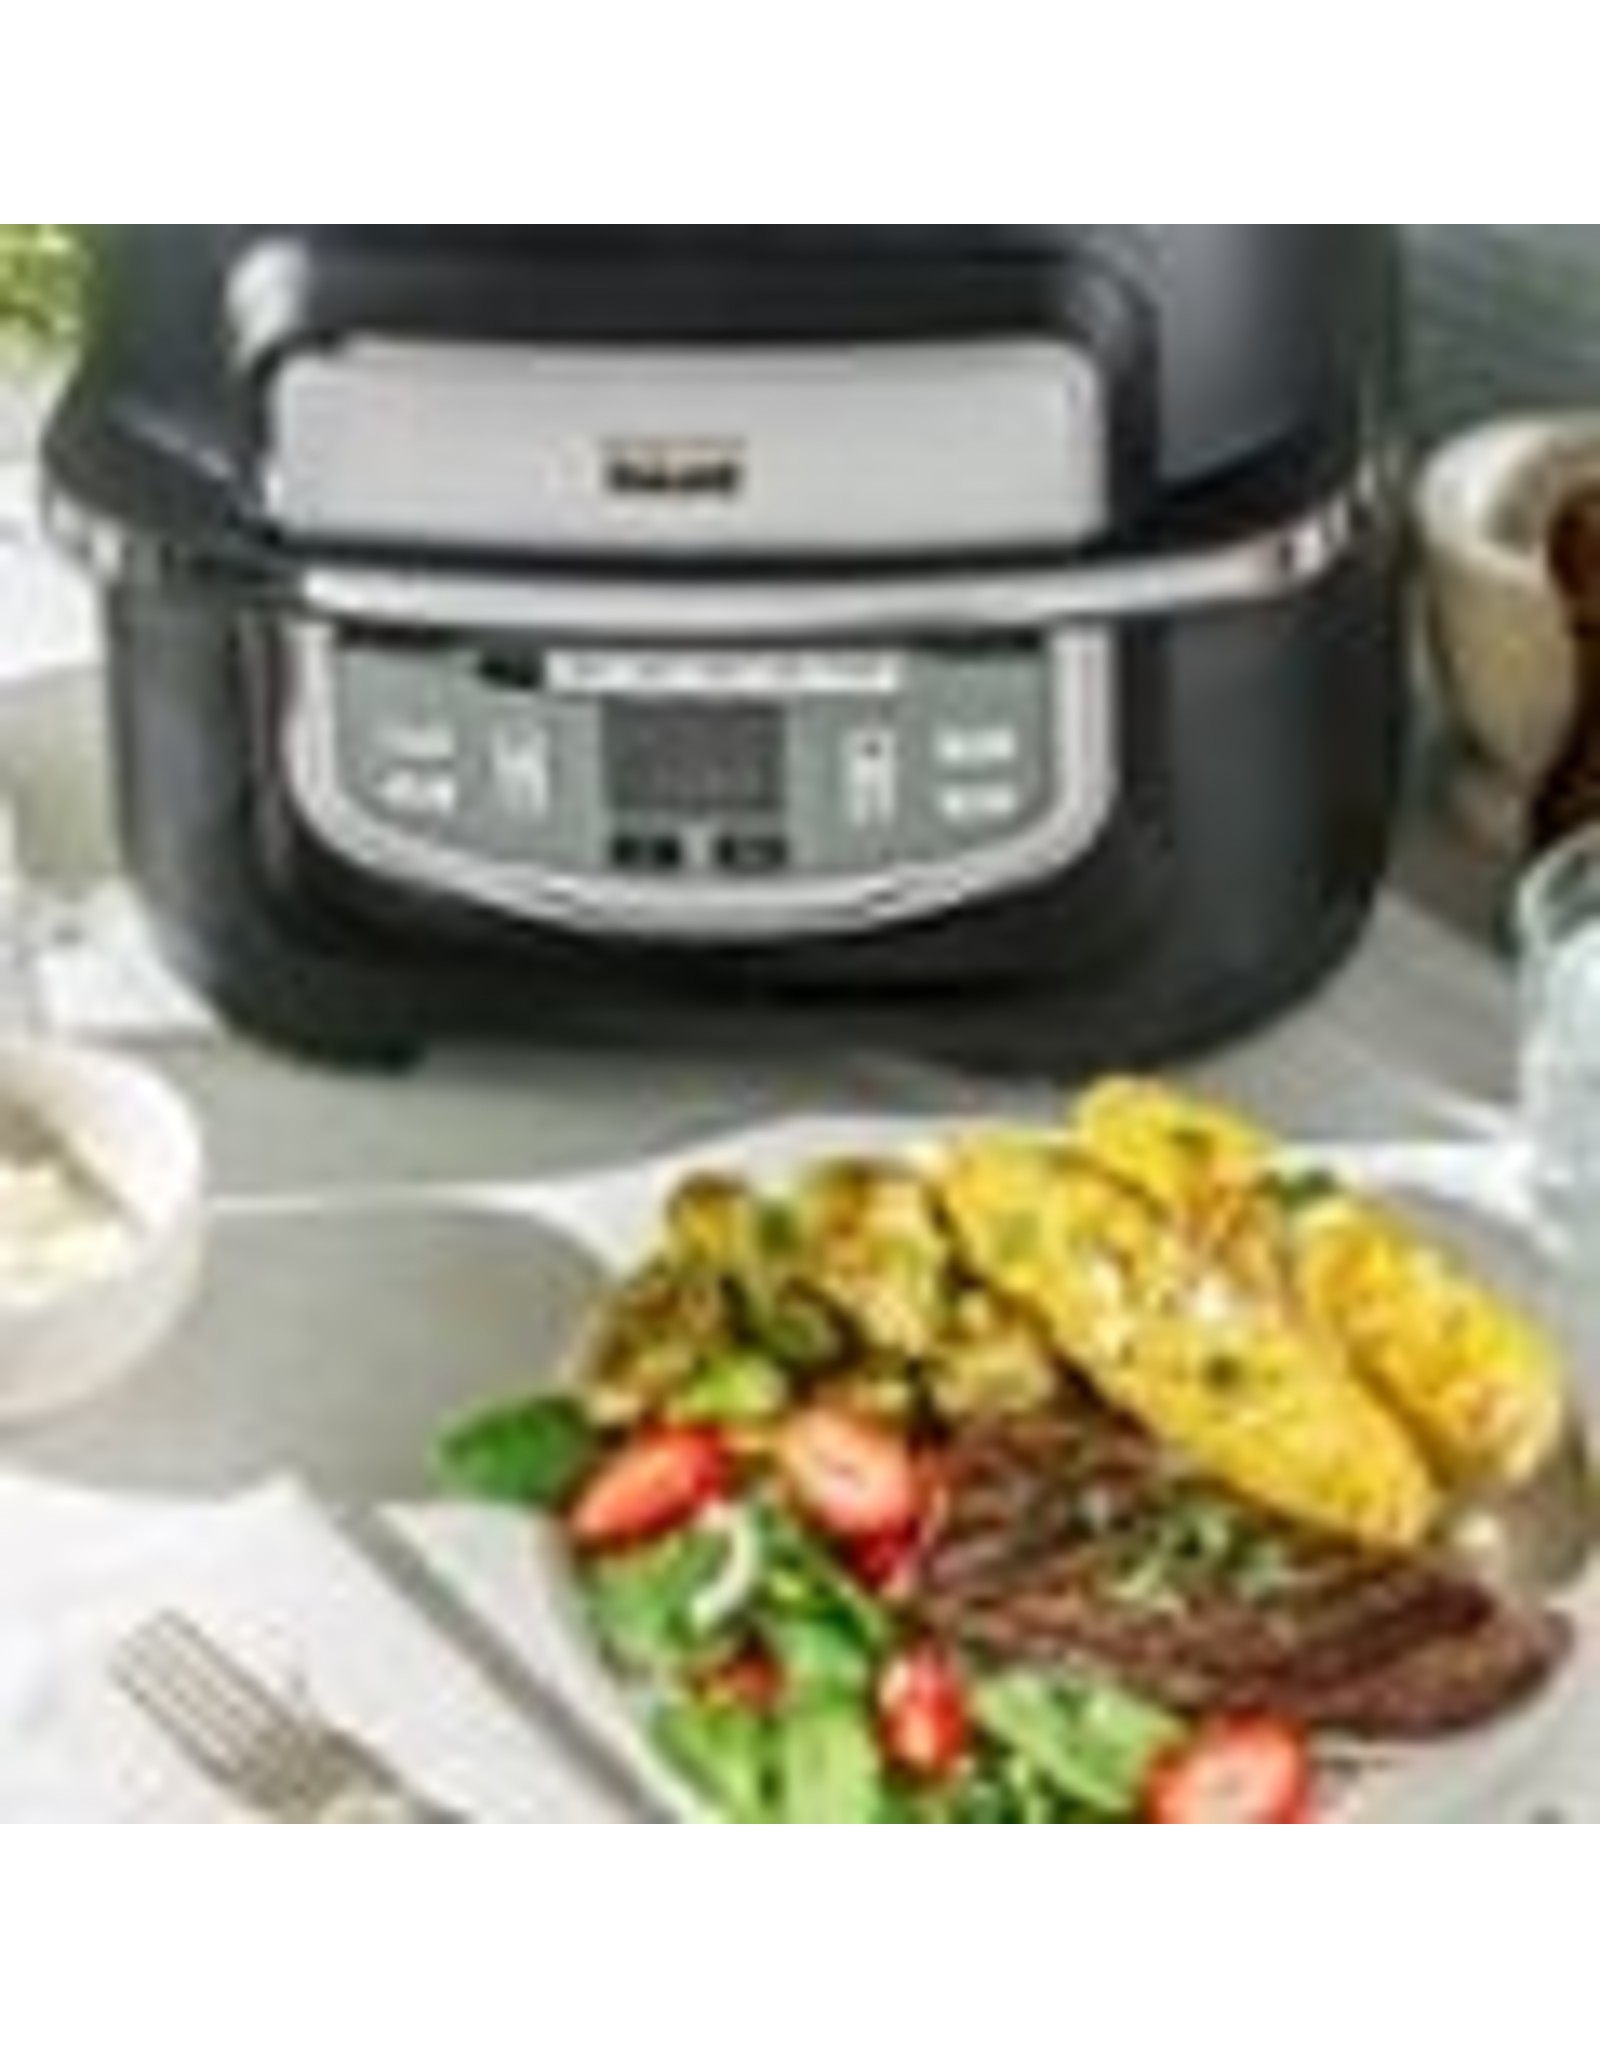 Bella pro Bella Pro Series - 9-in-1 Indoor Grill with 5.8-qt Air Fryer